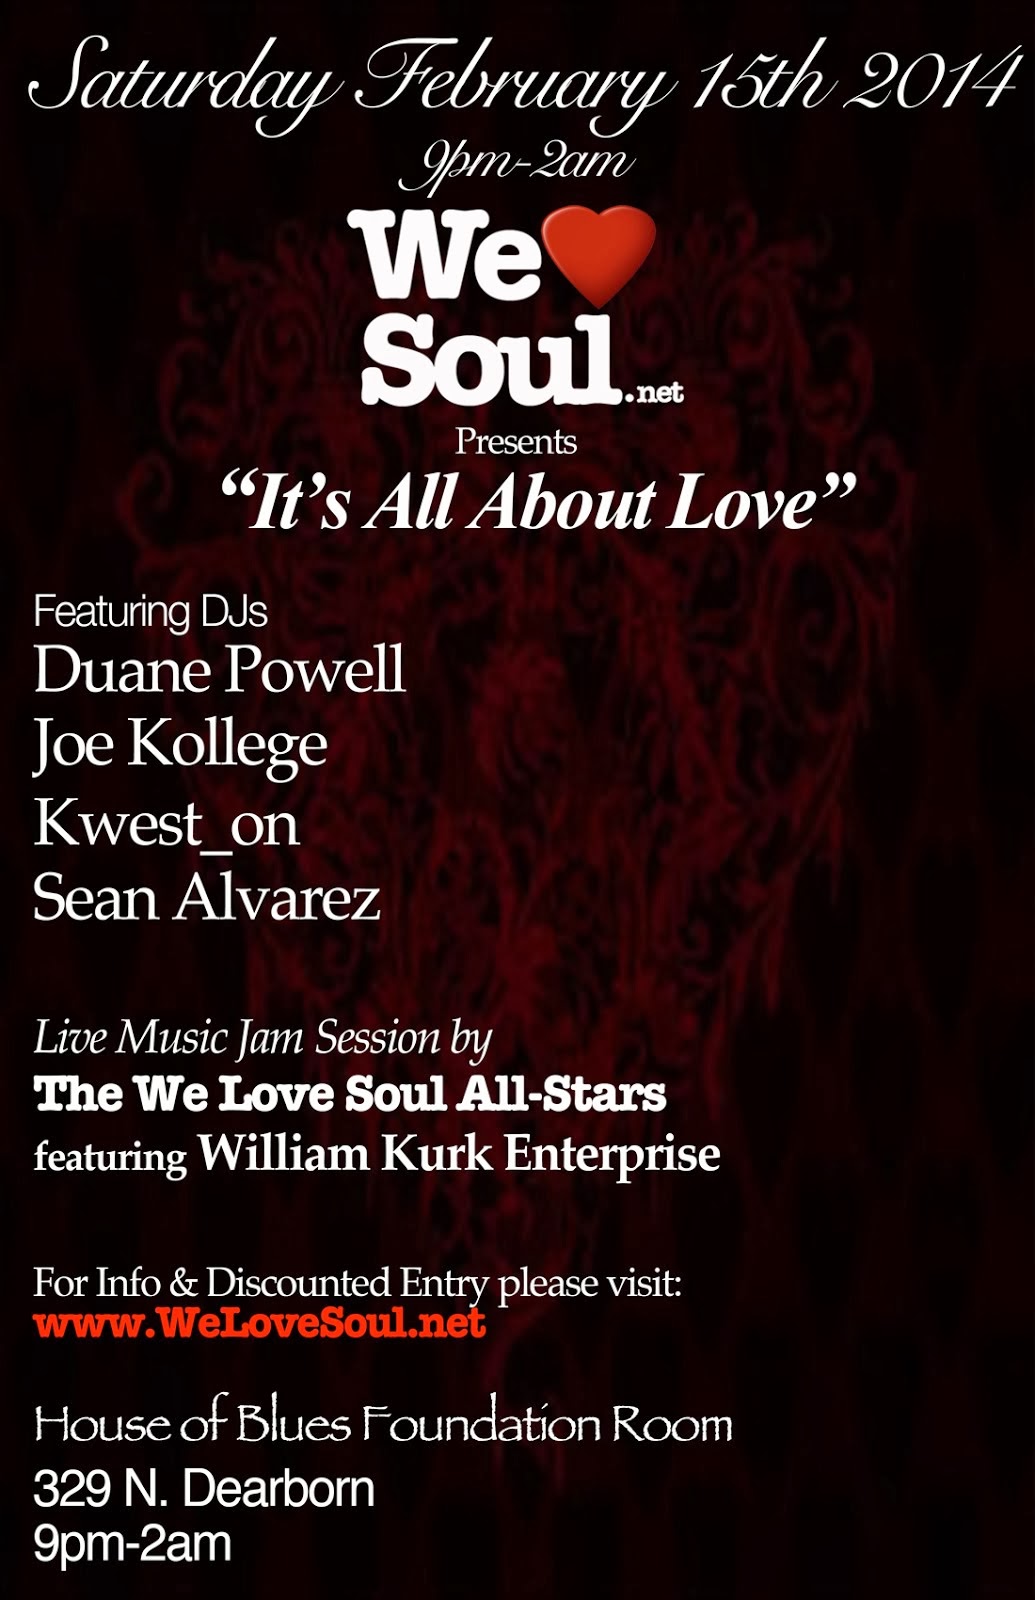 Sat Feb.15: We Love Soul presents It's All About Love